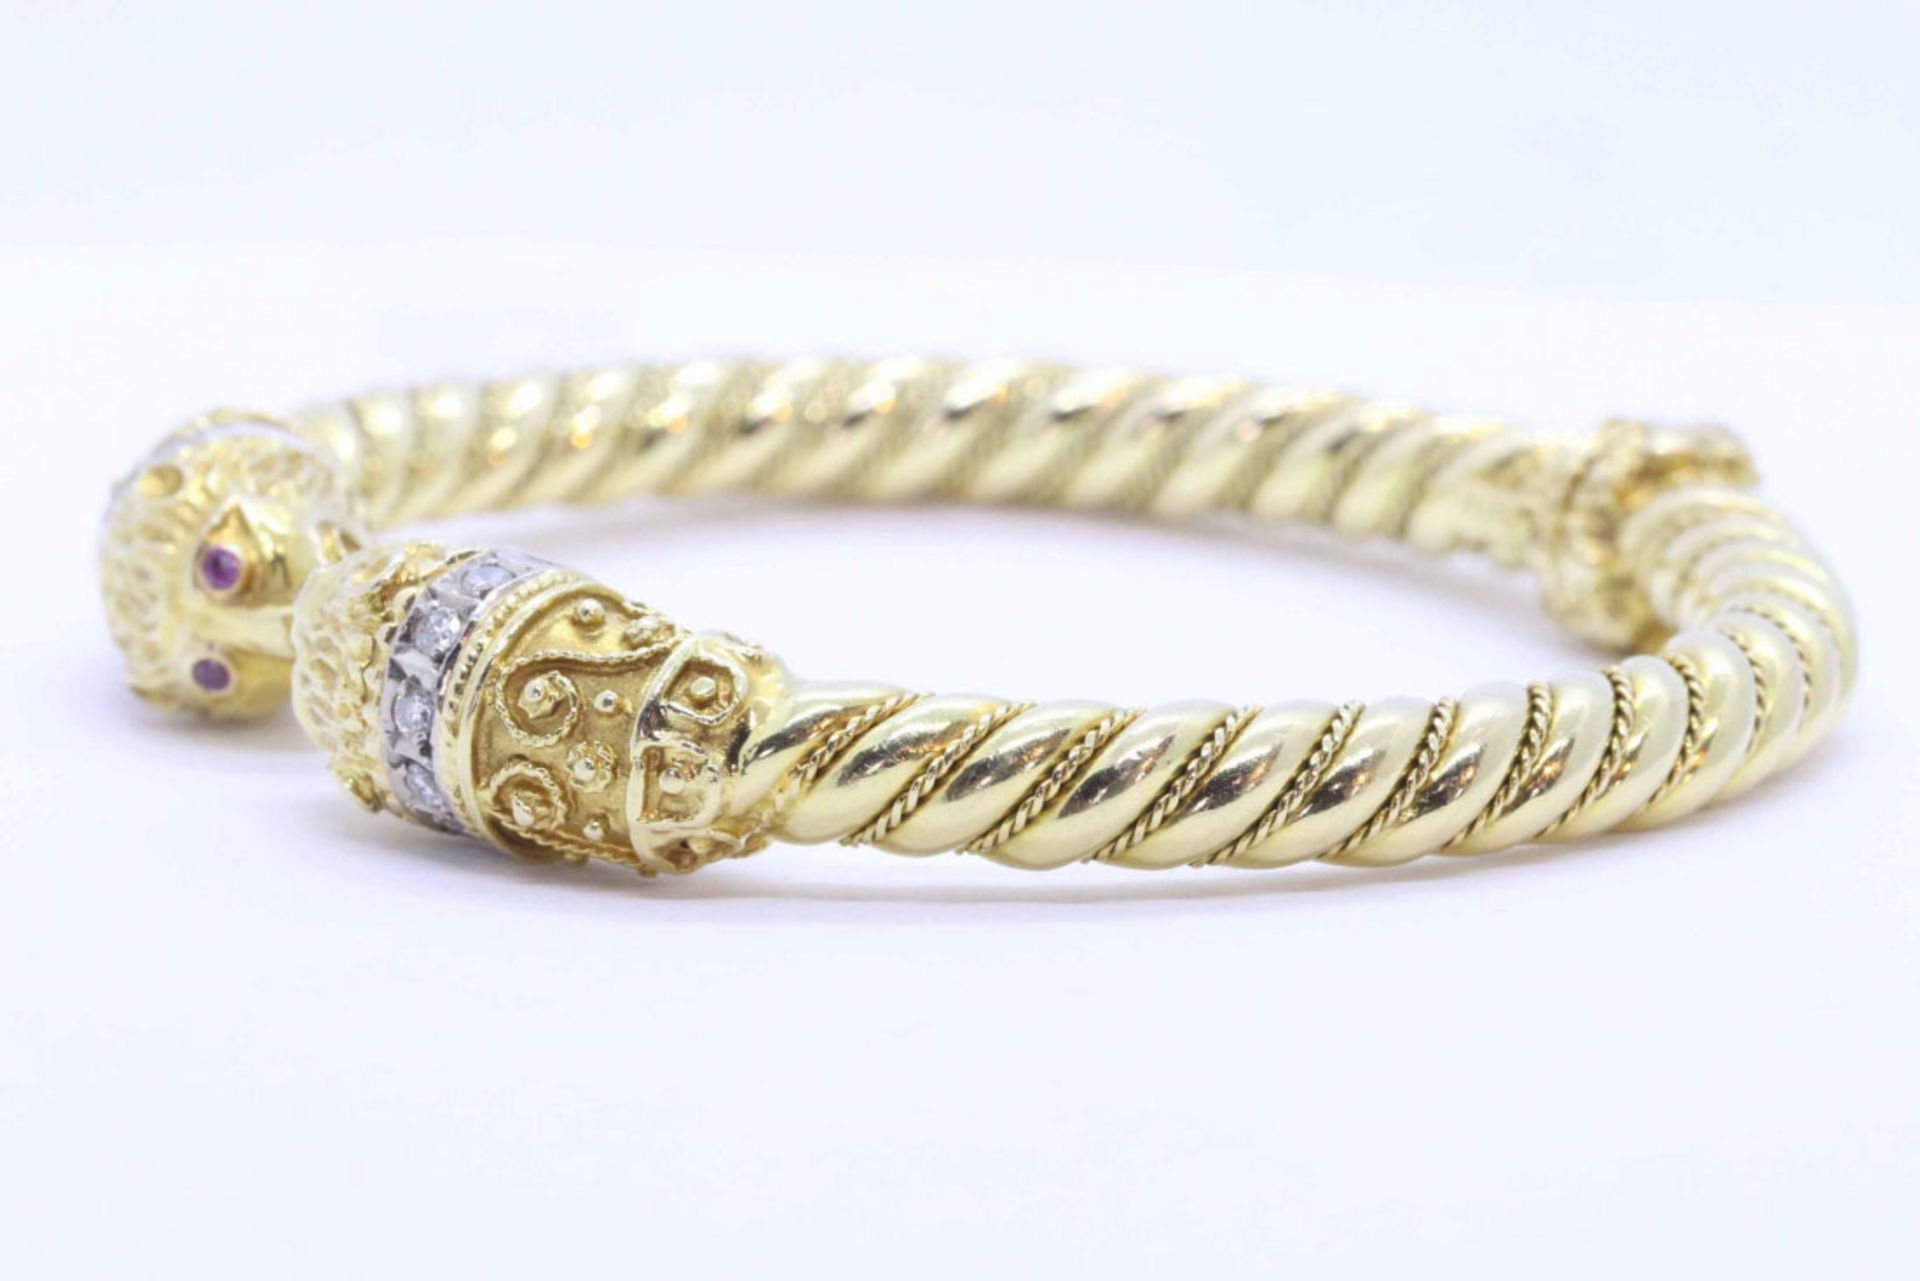 Contemporary bracelet in 18K yellow gold, set with diamonds and rubies